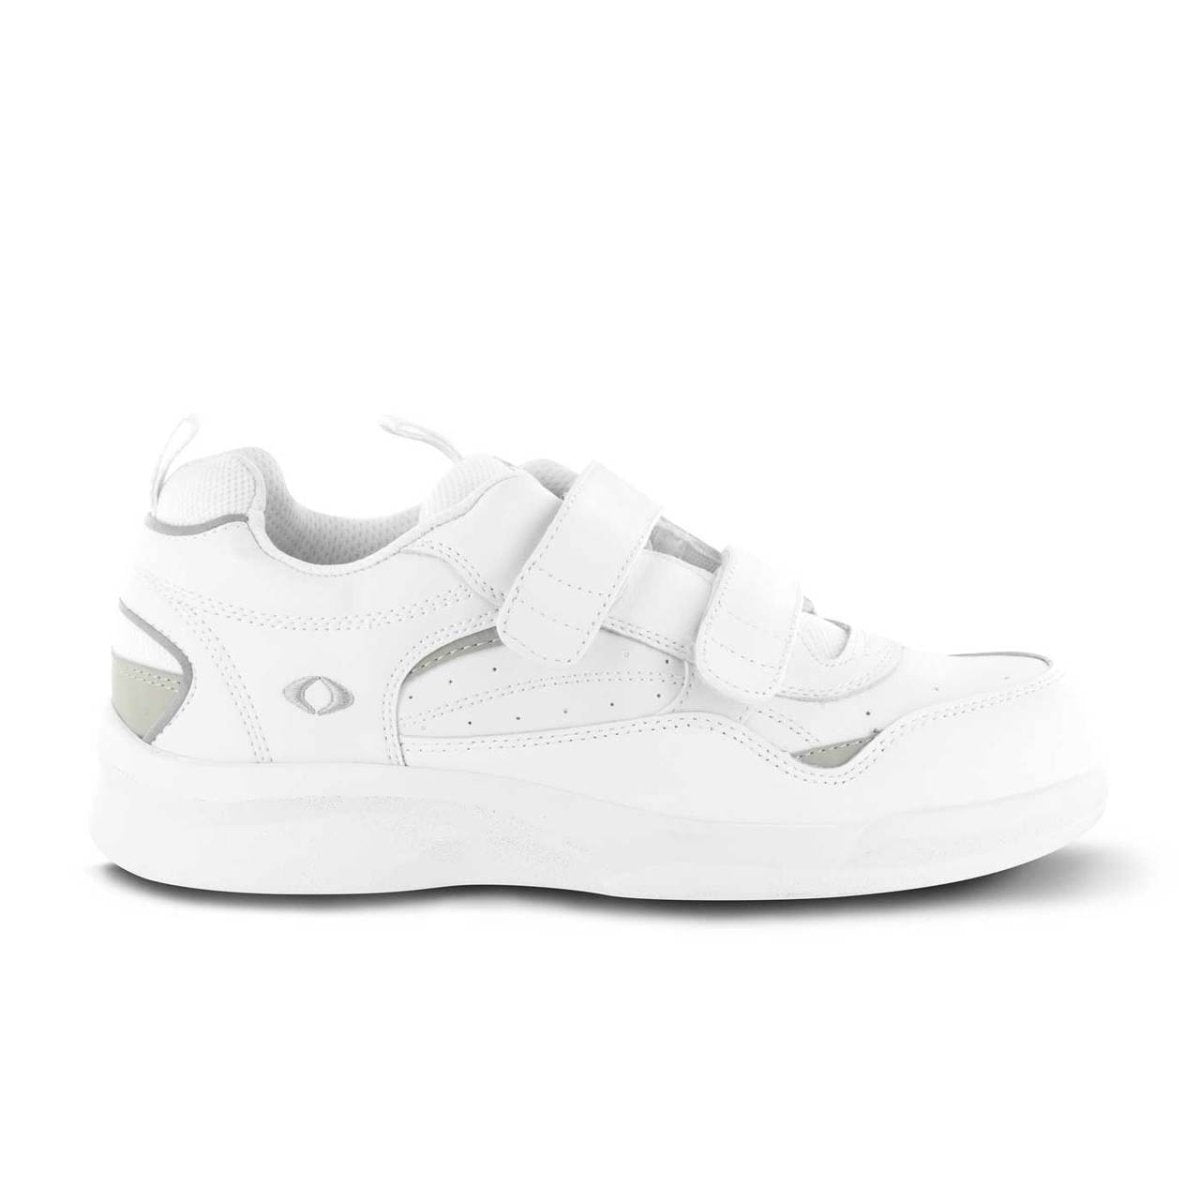 APEX G8210M AMBULATOR ATHLETIC DOUBLE STRAP MEN'S ACTIVE SHOE IN WHITE - TLW Shoes